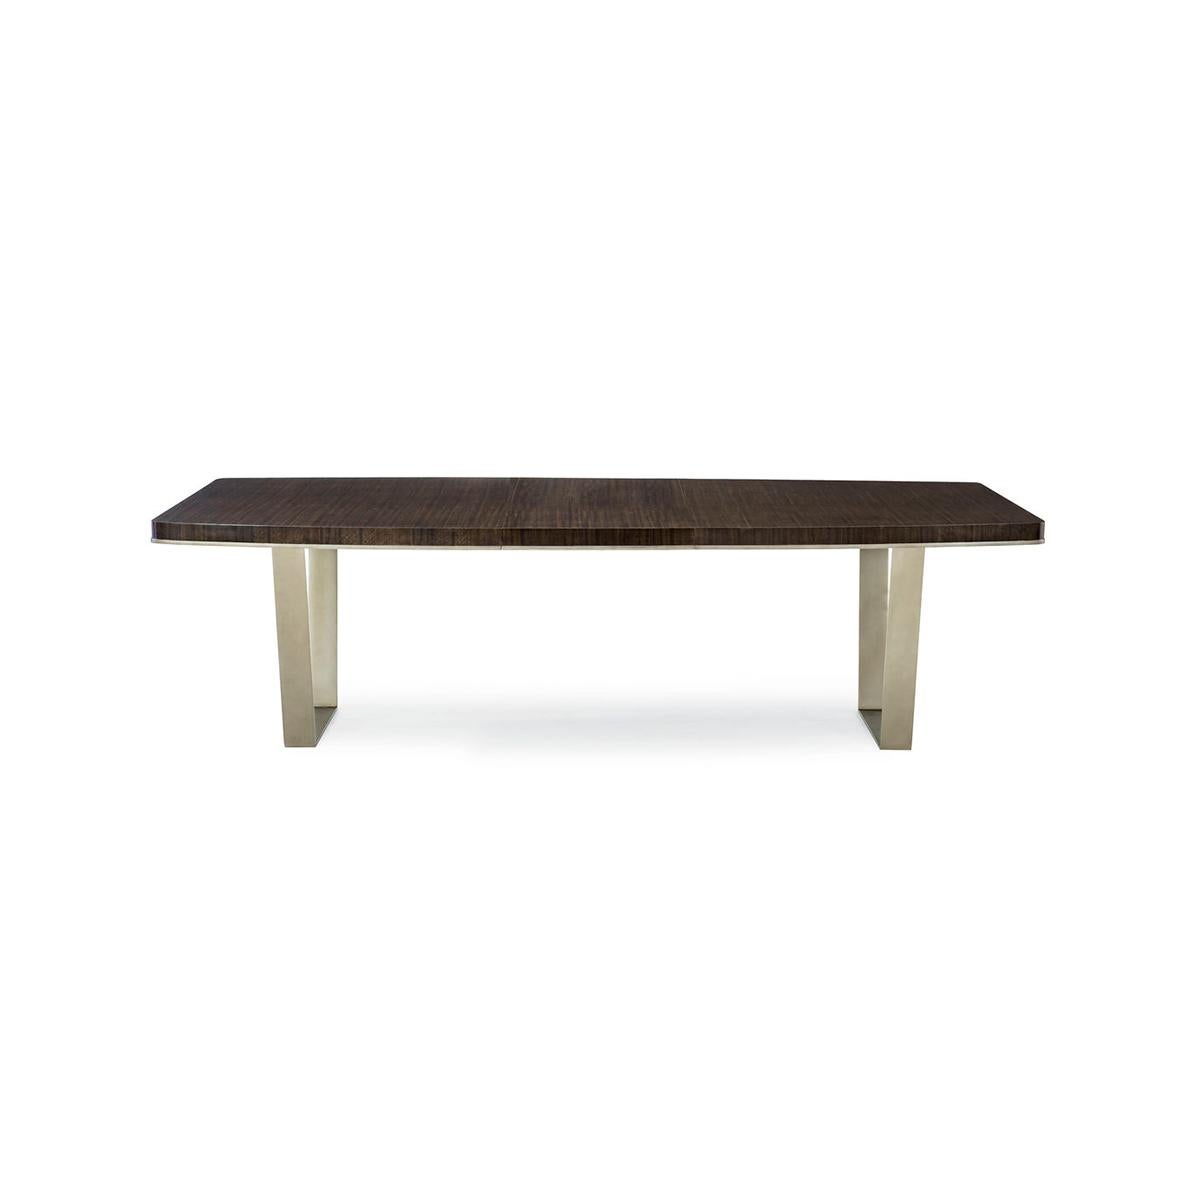 Fumed figured eucalyptus comes to life atop a dining table that is suspended by angled, contemporary metal braces. The wood’s Aged Bourbon finish results in a commanding presence that can be expanded to easily seat 10 people.

The accent molding is